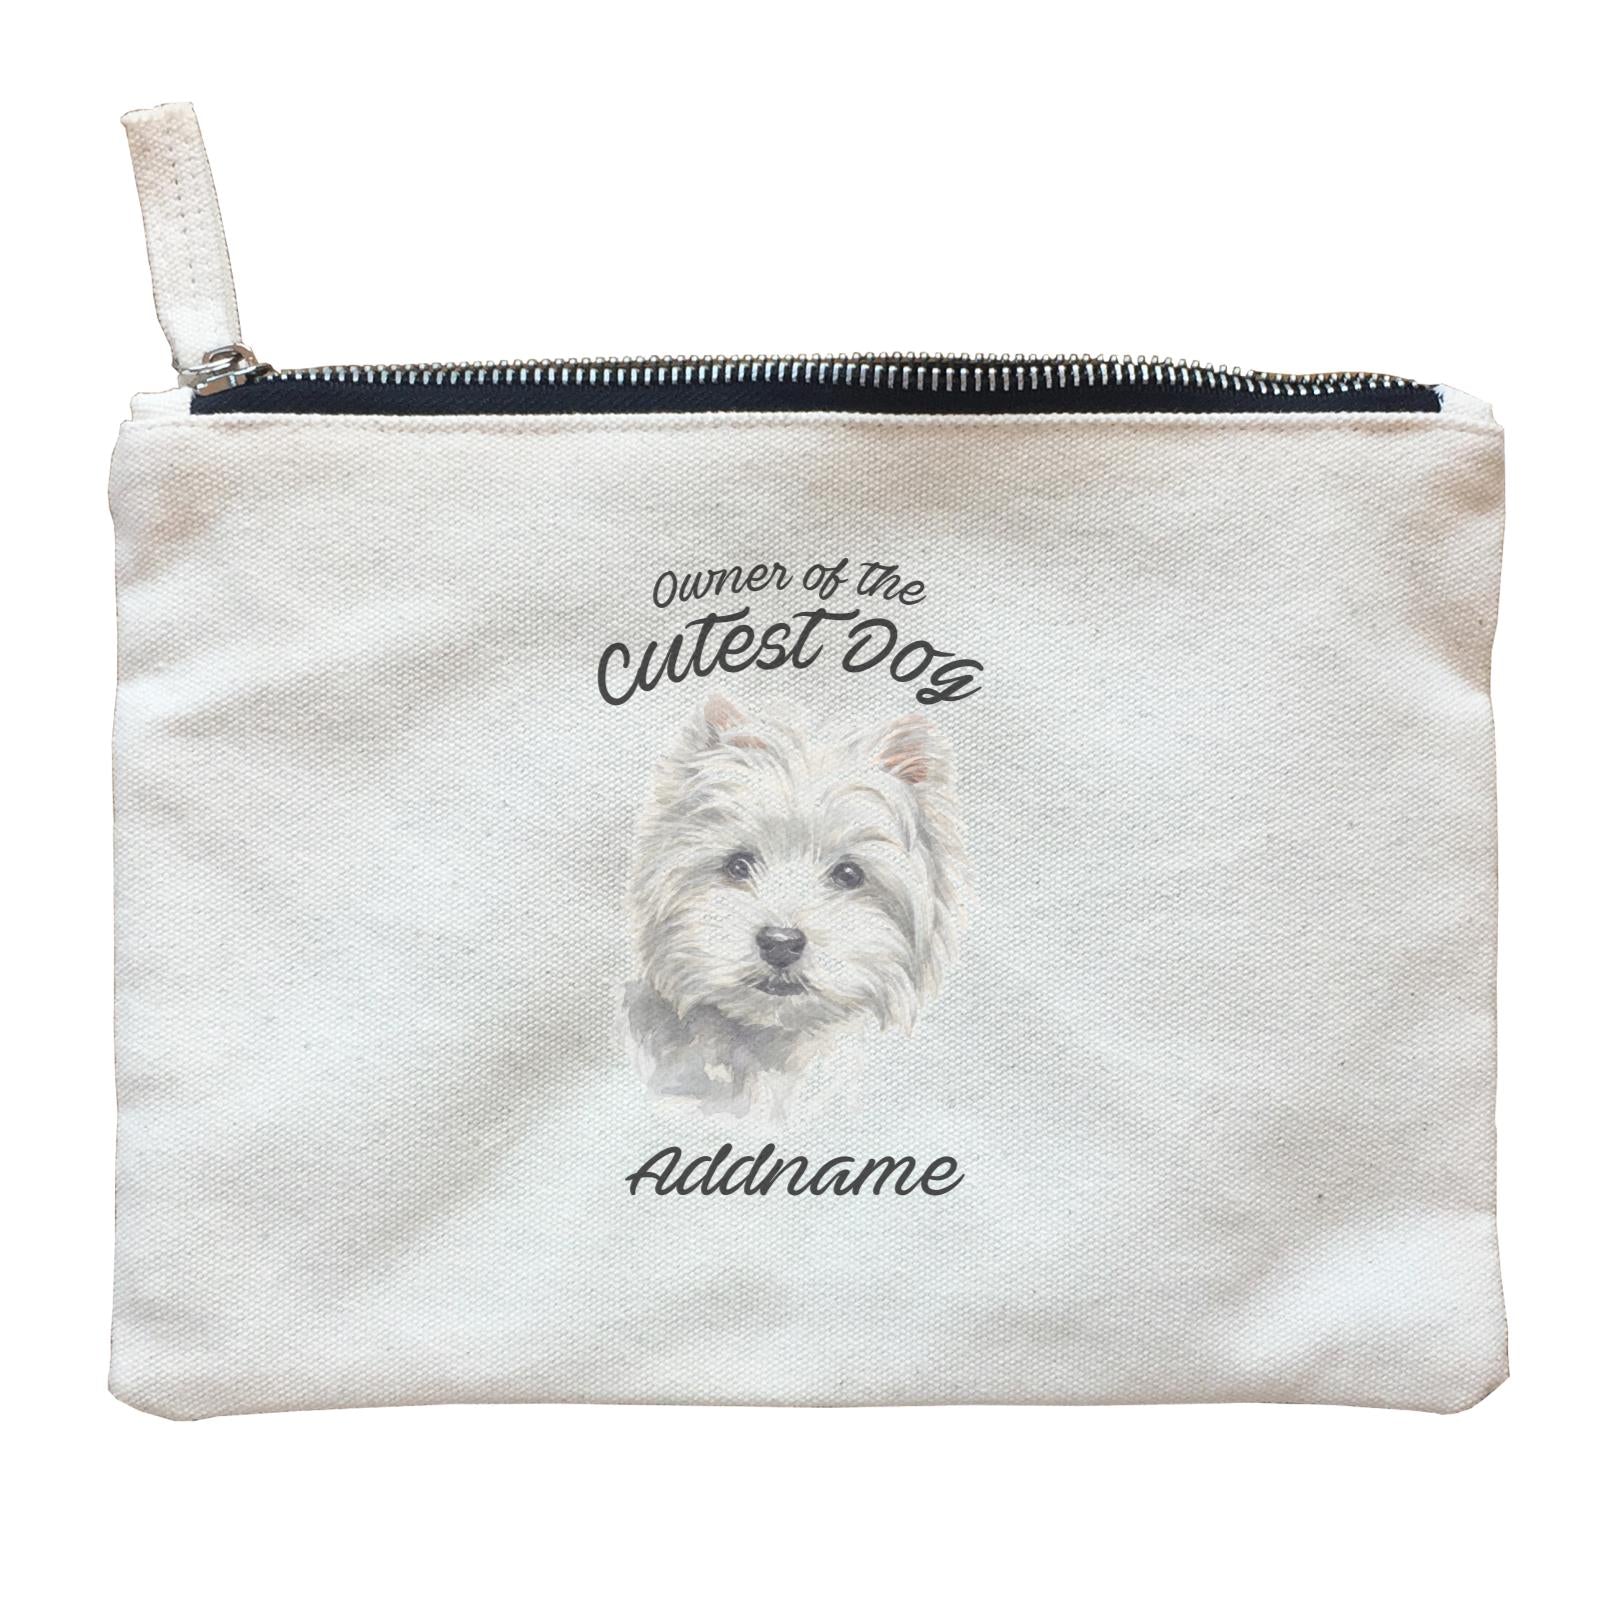 Watercolor Dog Owner Of The Cutest Dog West Highland White Terrier Addname Zipper Pouch